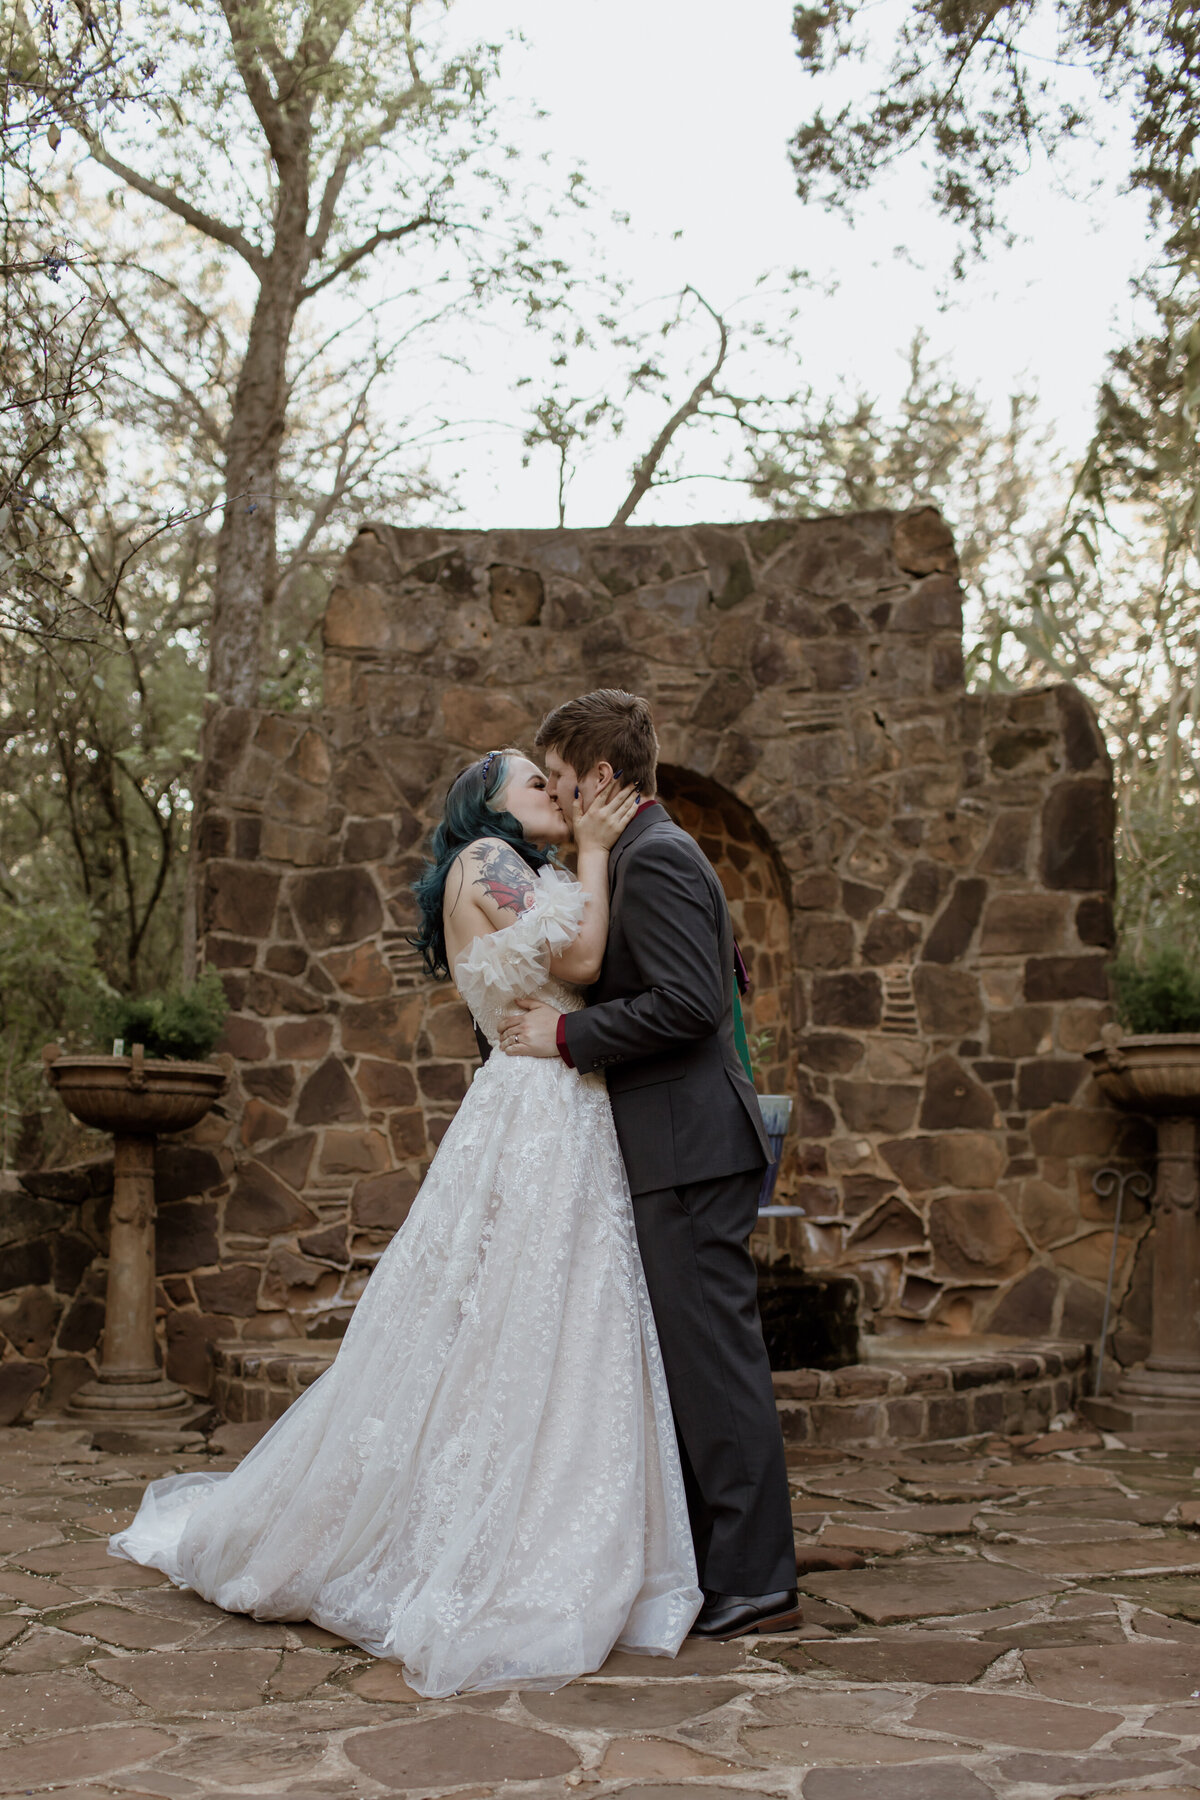 A couple shares their first kiss as husband and wife at Weston Gardens in Bloom in Fort Worth Texas. Captured by Fort Worth Wedding Photographer, Megan Christine Studio